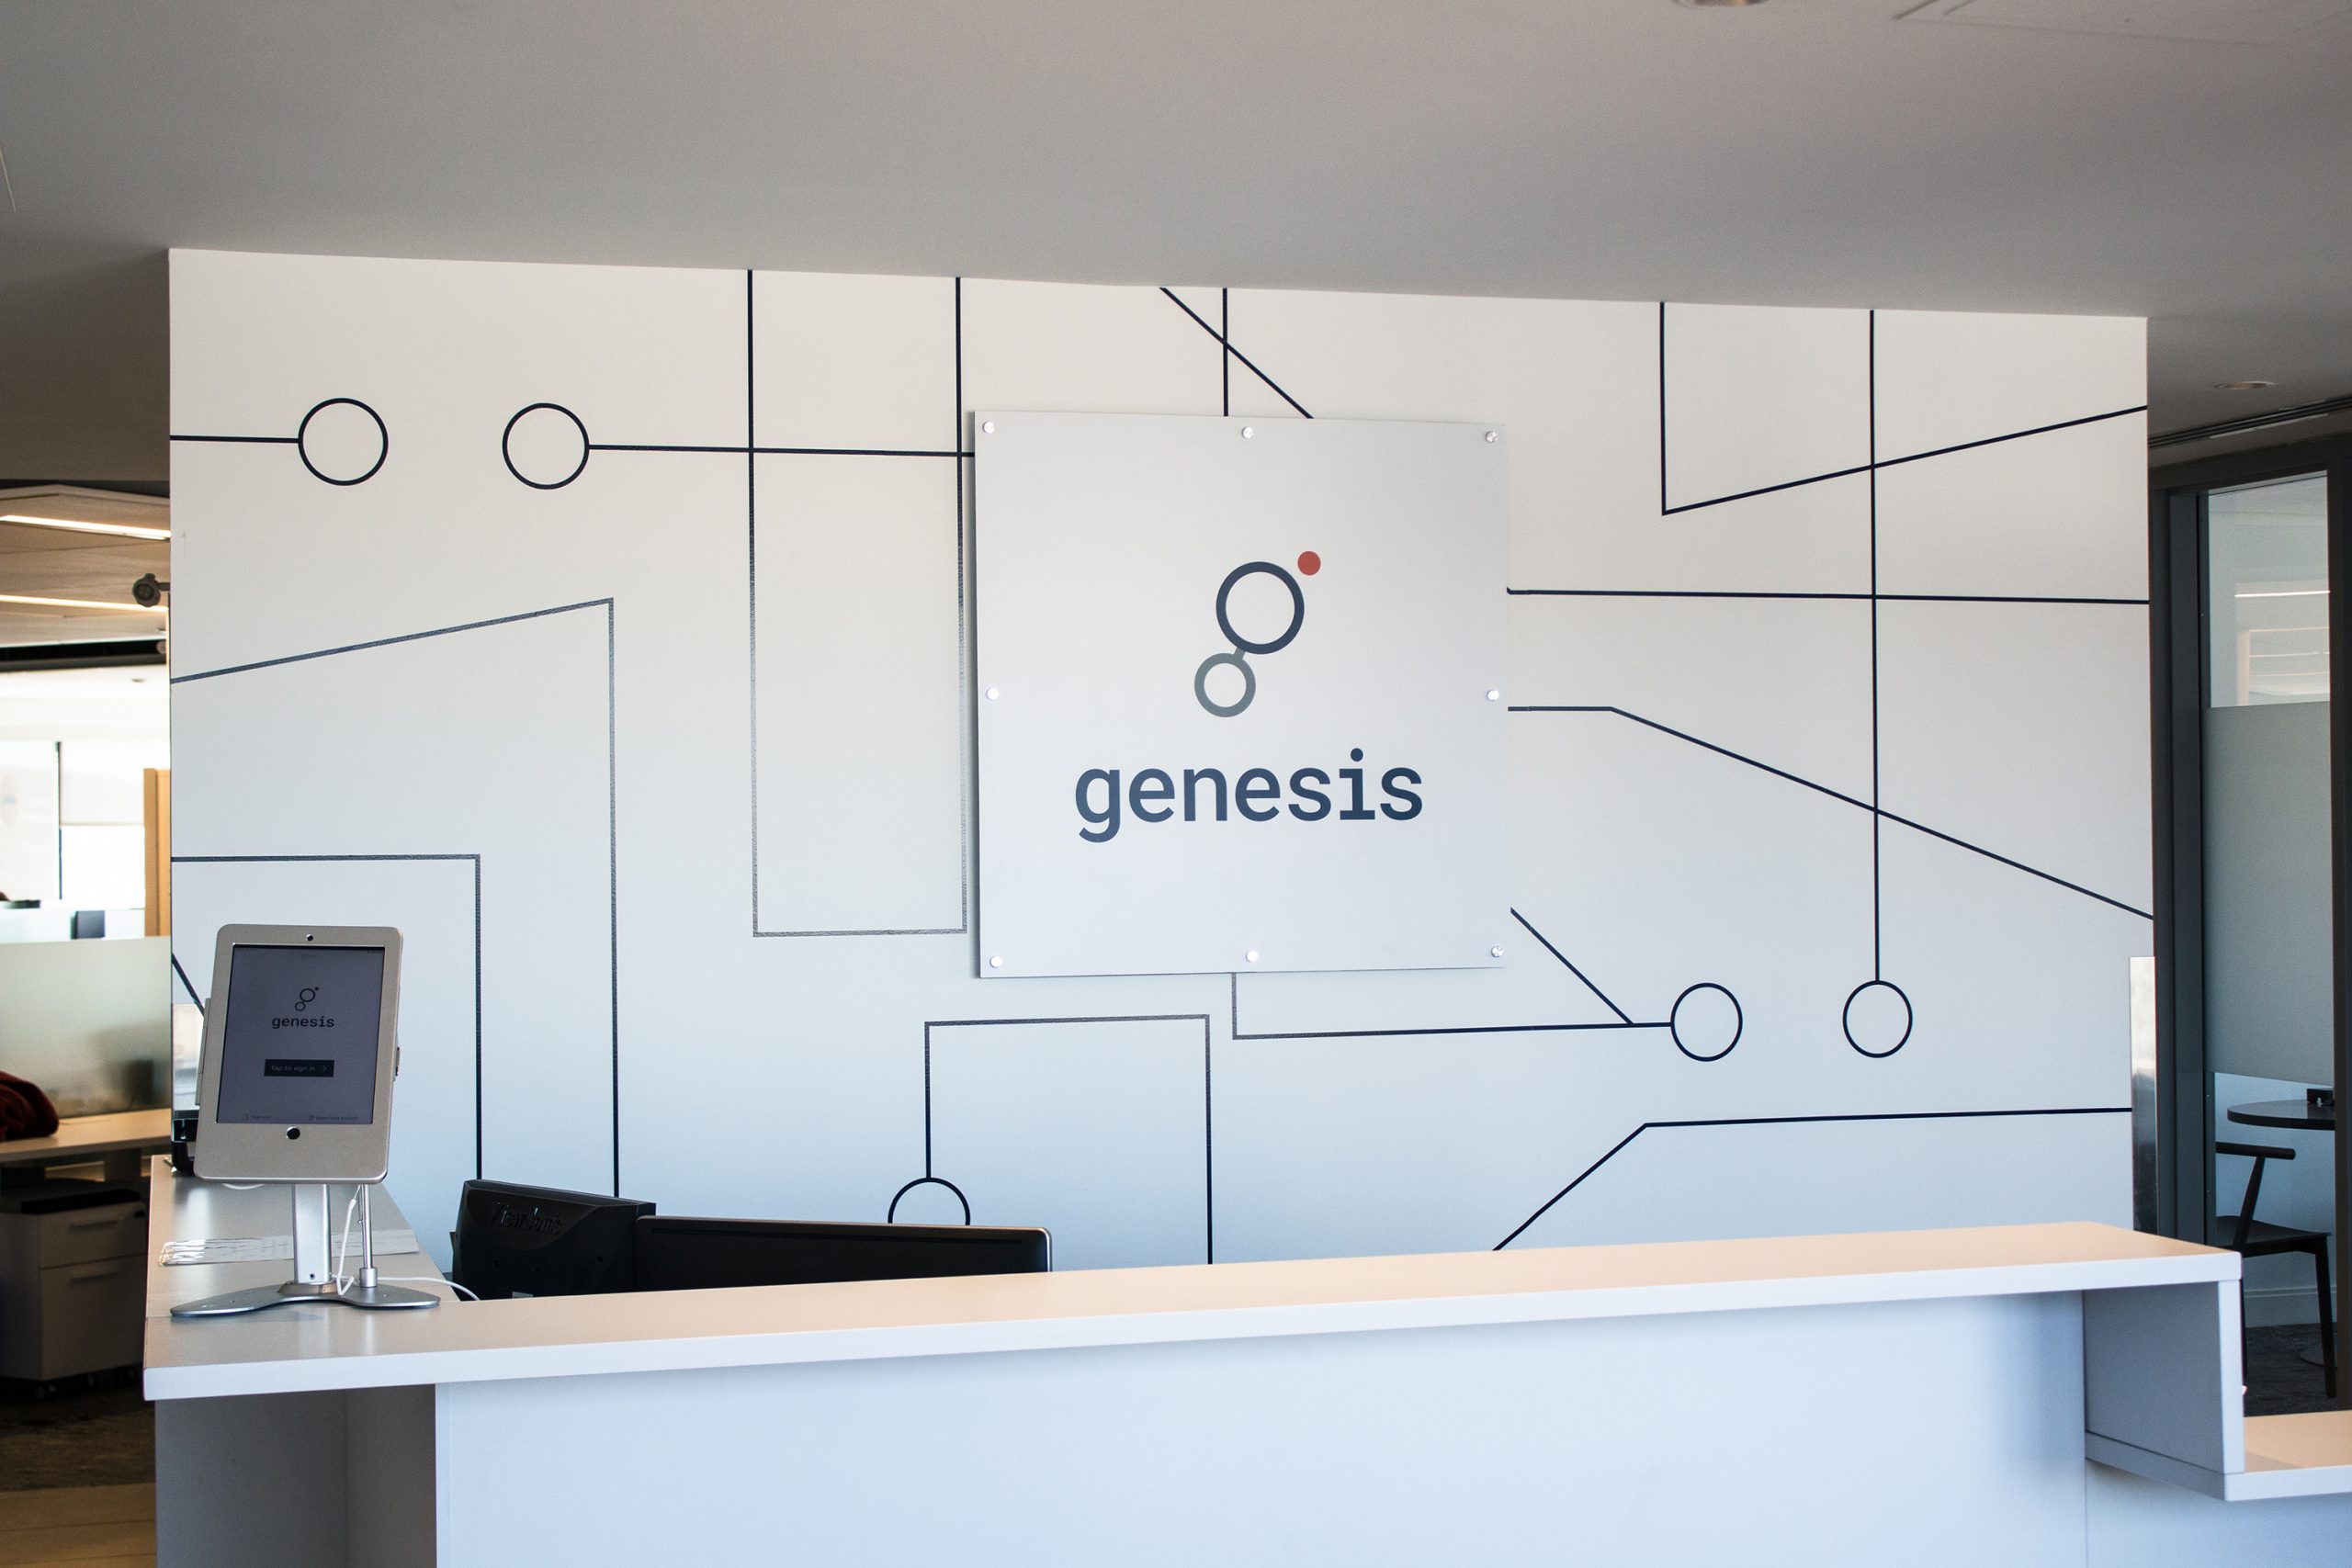 The Genesis reception area with a Genesis sign on the back white wall